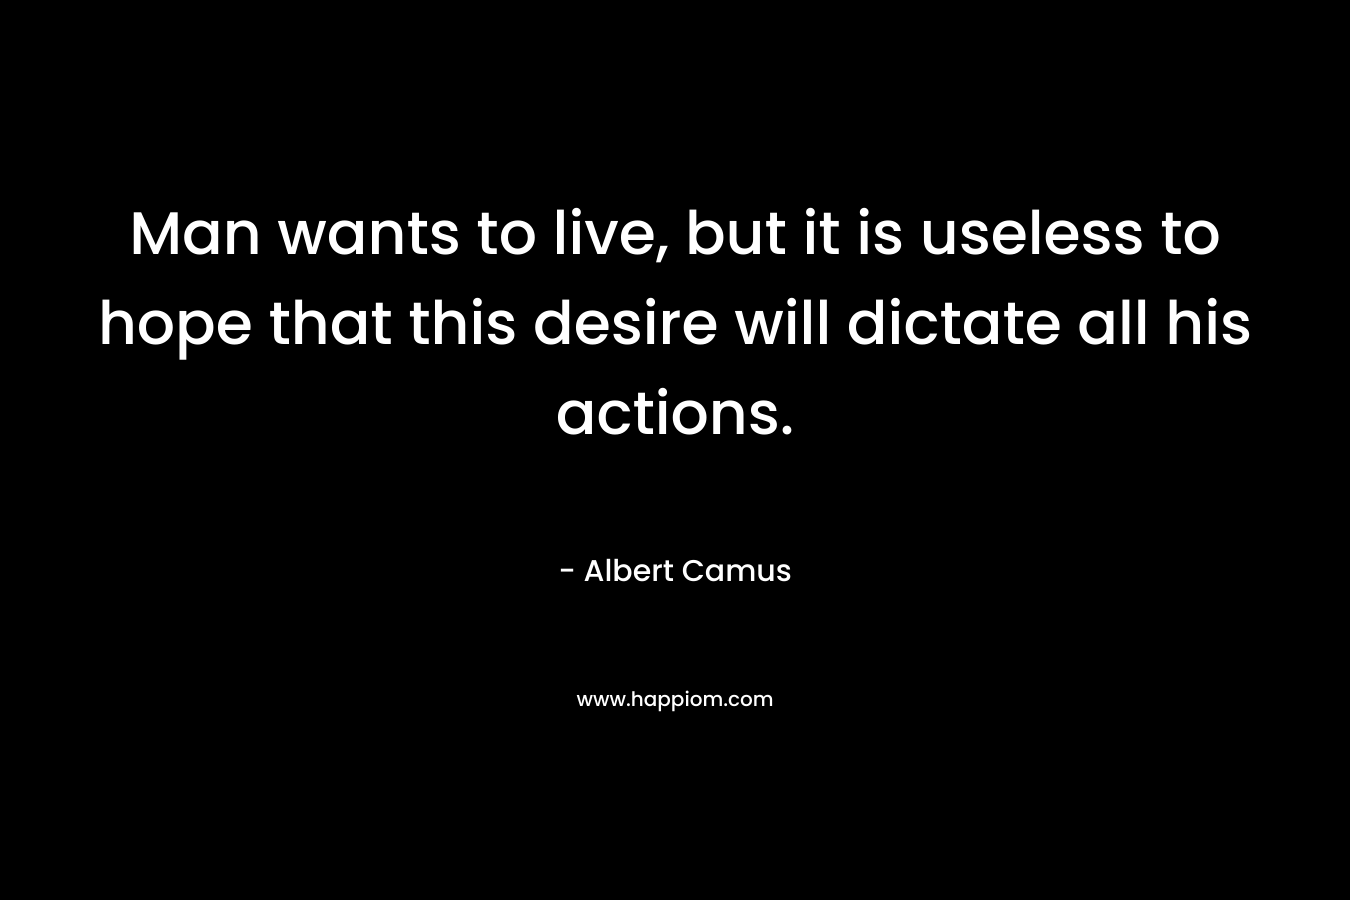 Man wants to live, but it is useless to hope that this desire will dictate all his actions. – Albert Camus